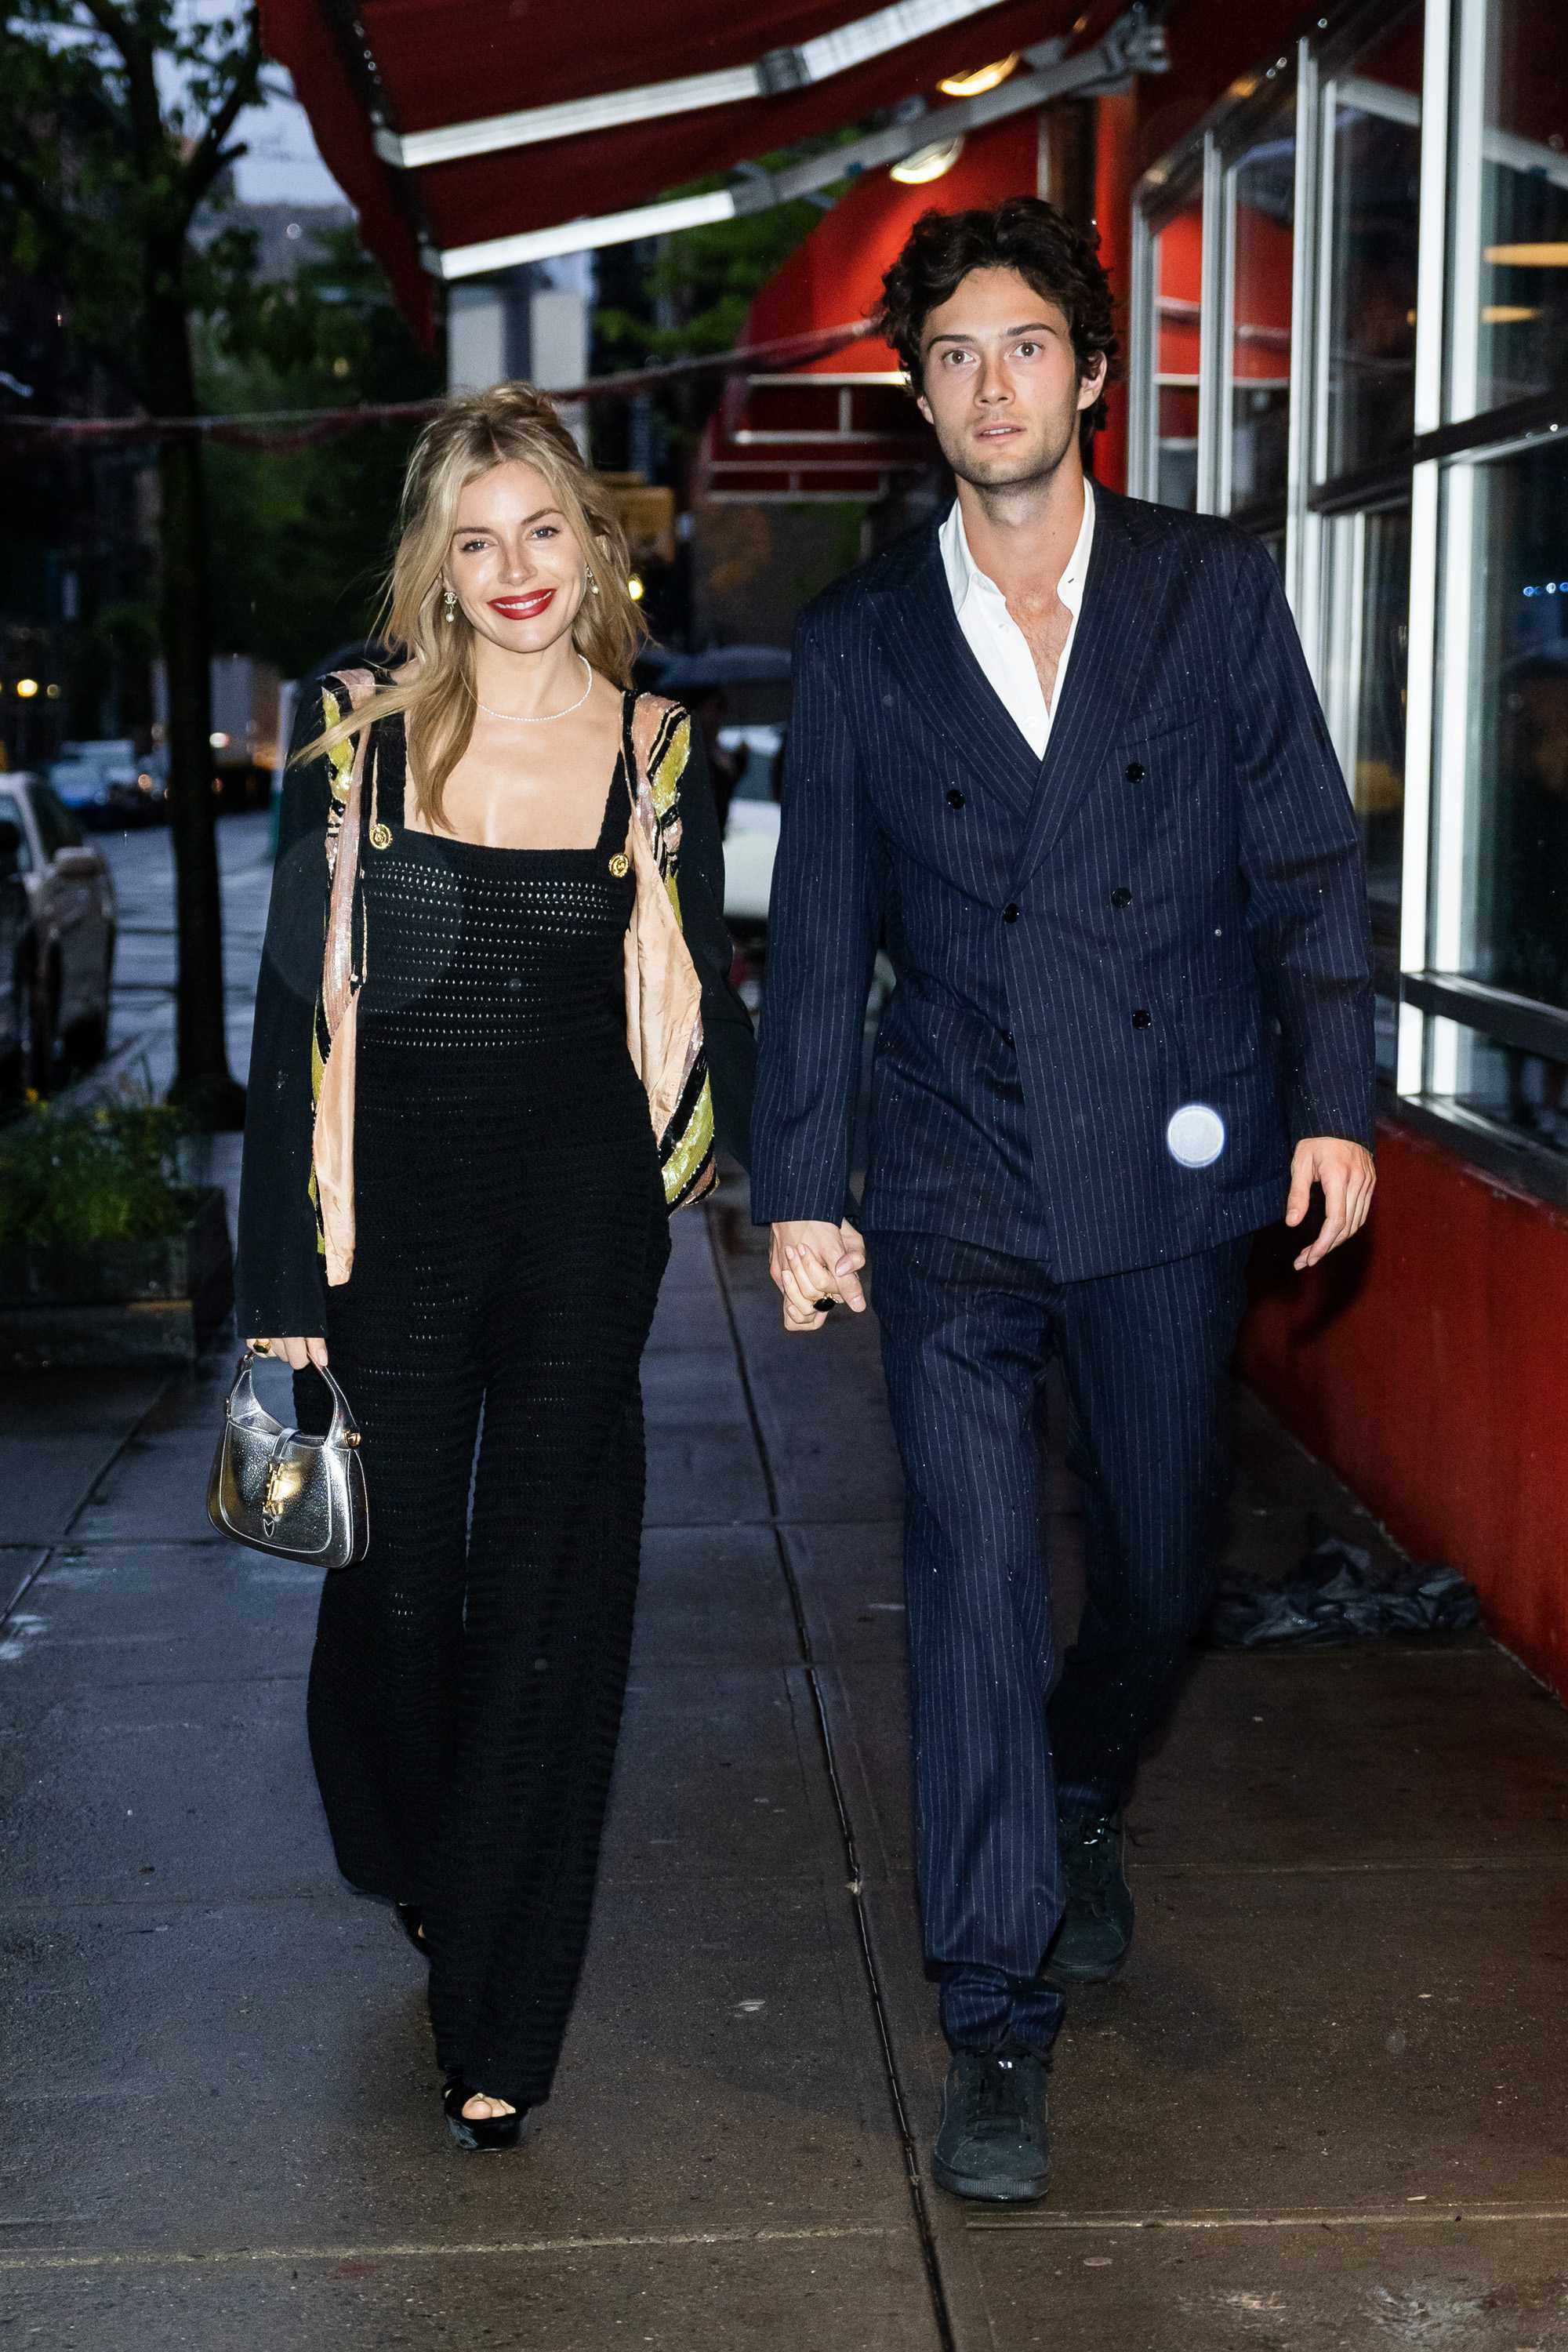 Sienna Miller (L) and Oli Green are seen arriving for a pre-Met Gala dinner hosted by Anna Wintour in SoHo on April 30, in New York City. Photo: Getty Images